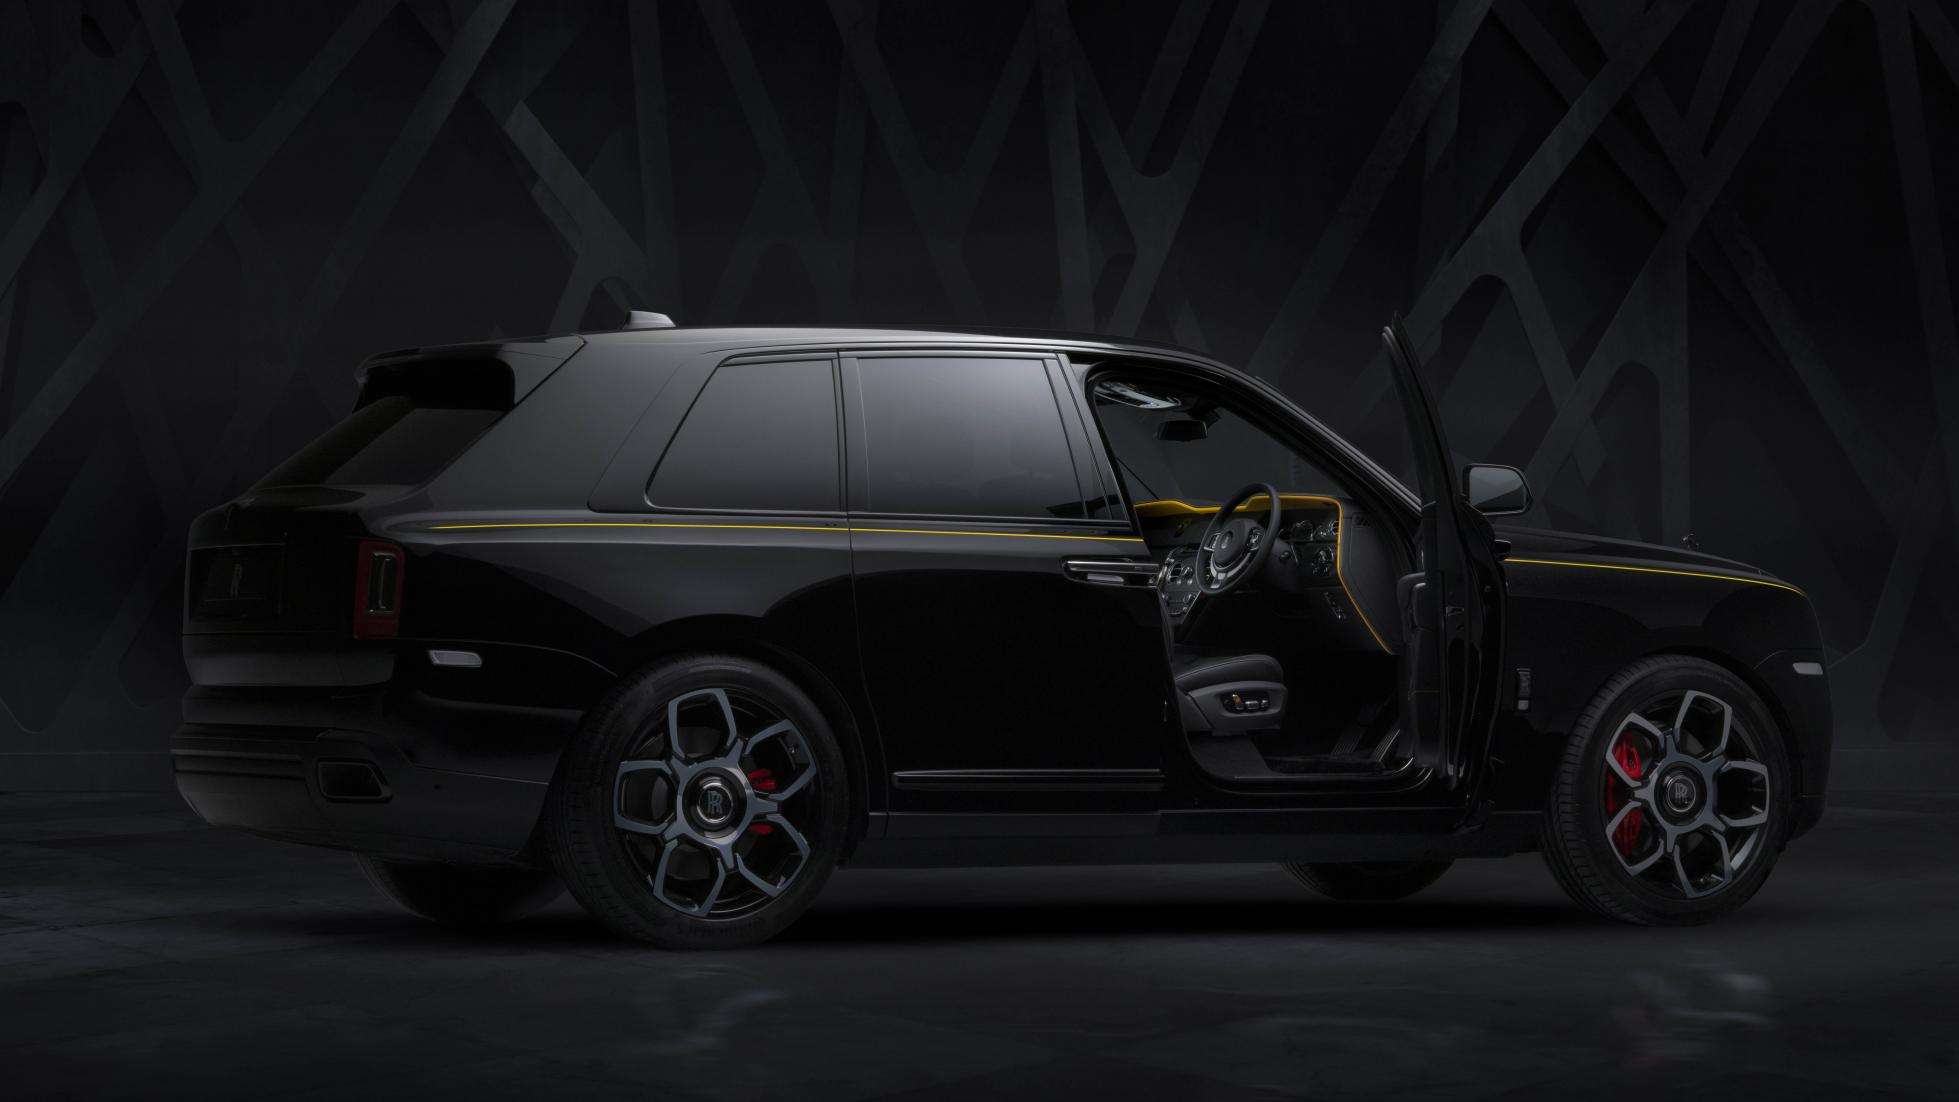 This Rolls-Royce Black Badge Cullinan gets more power